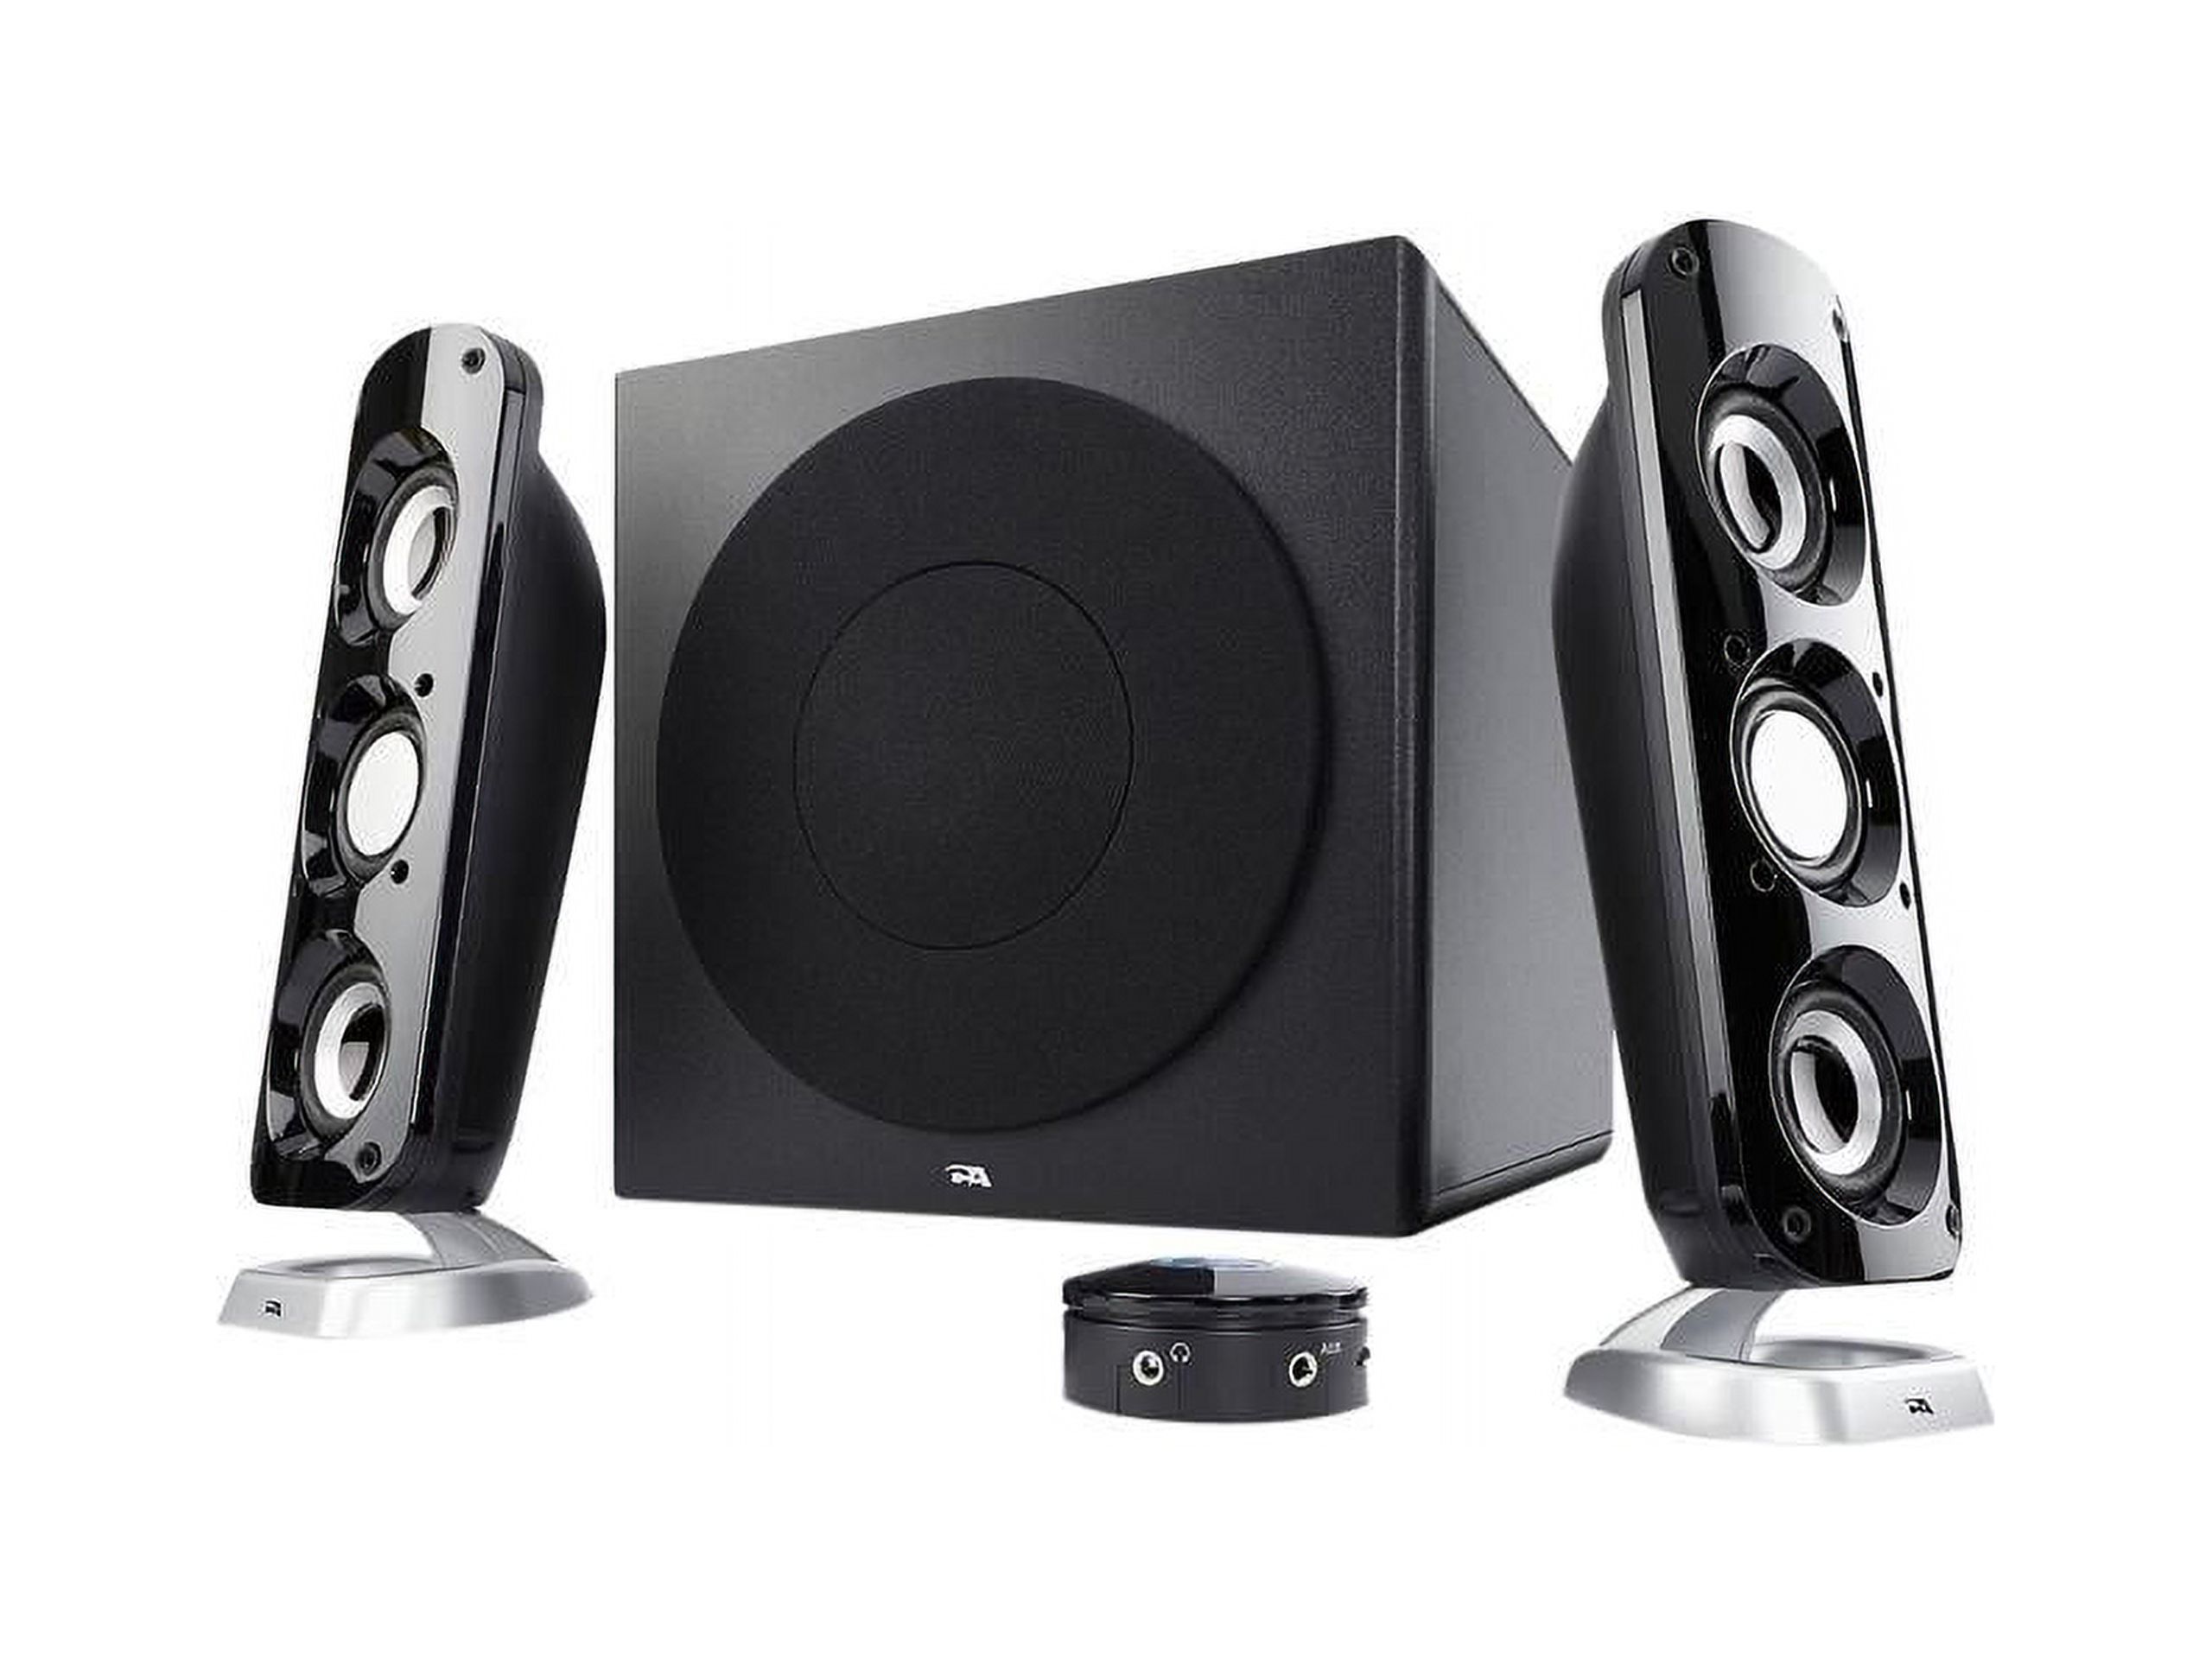 Cyber Acoustics 2.1 Speaker System 36 W RMS (CA-3908) - image 1 of 2